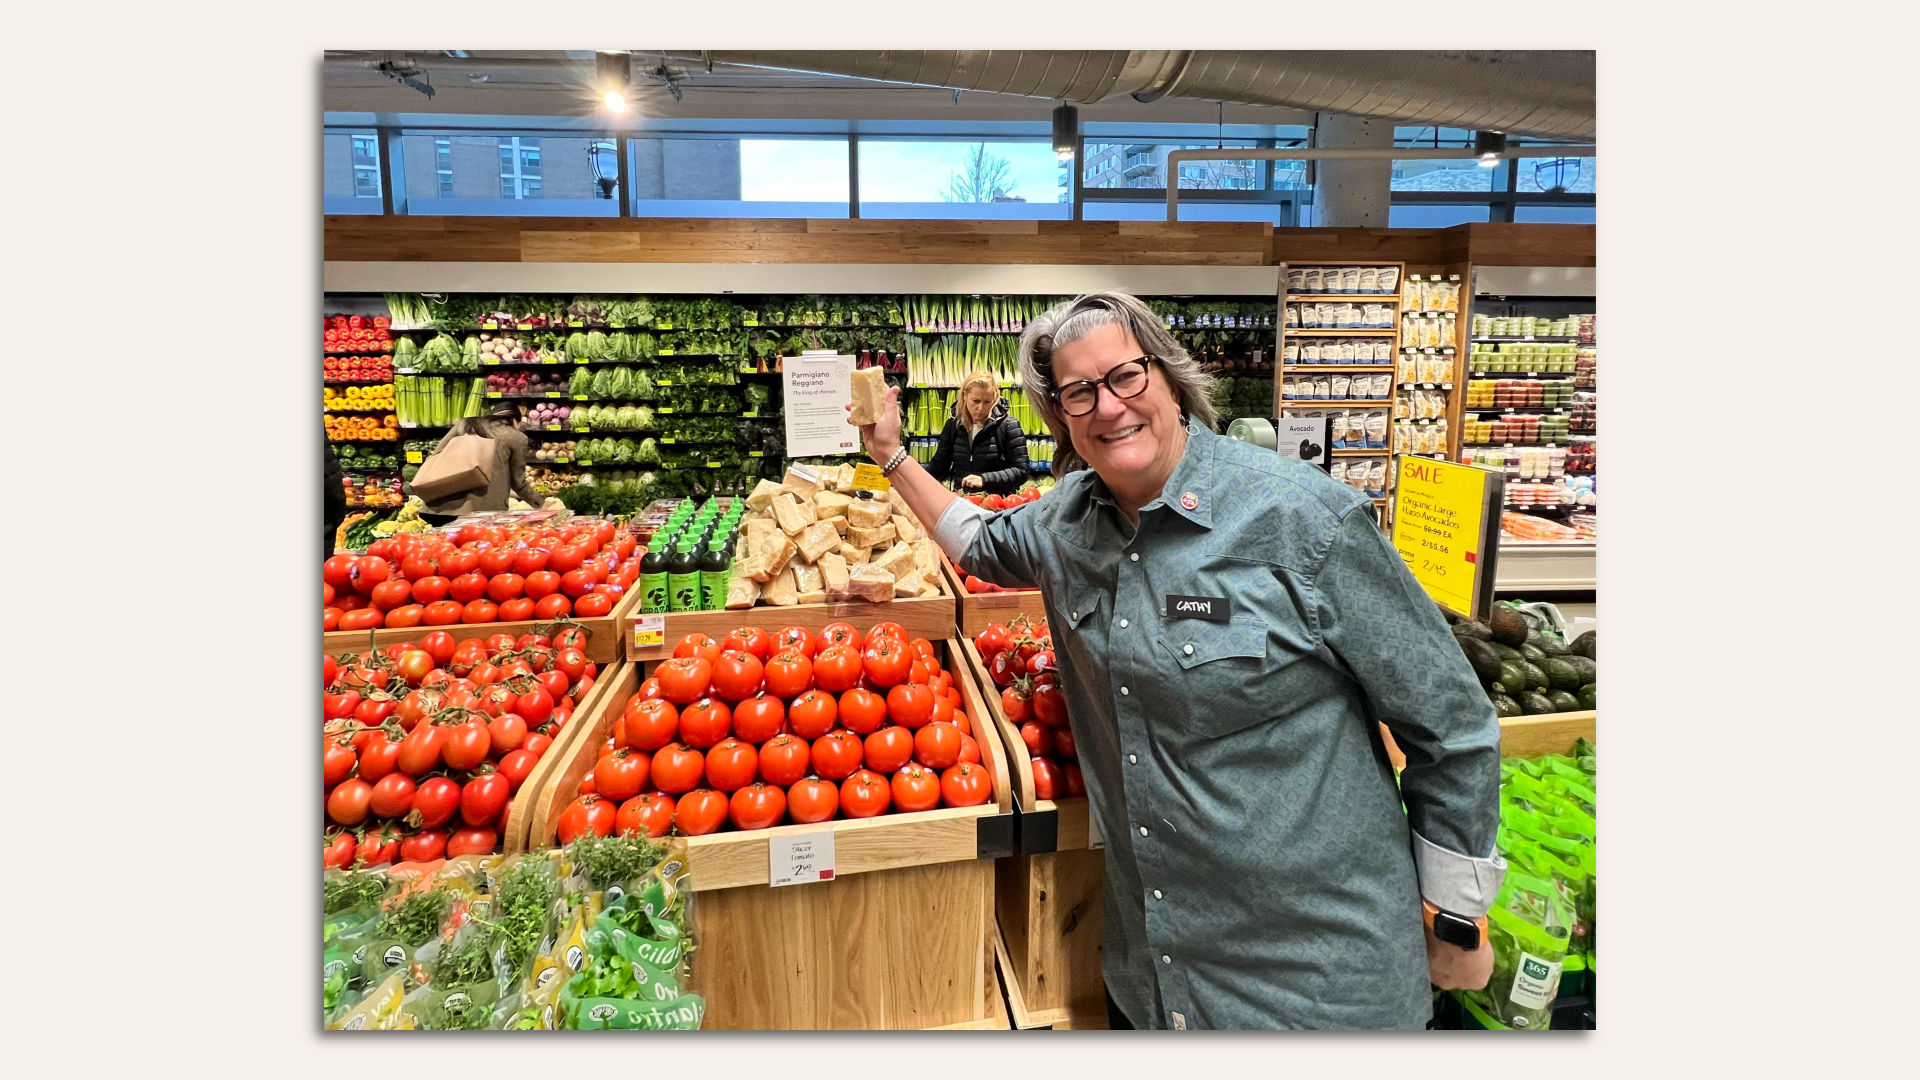 Cathy Strange, a Whole Foods executive, stands in front of a display of tomatoes and cheese.